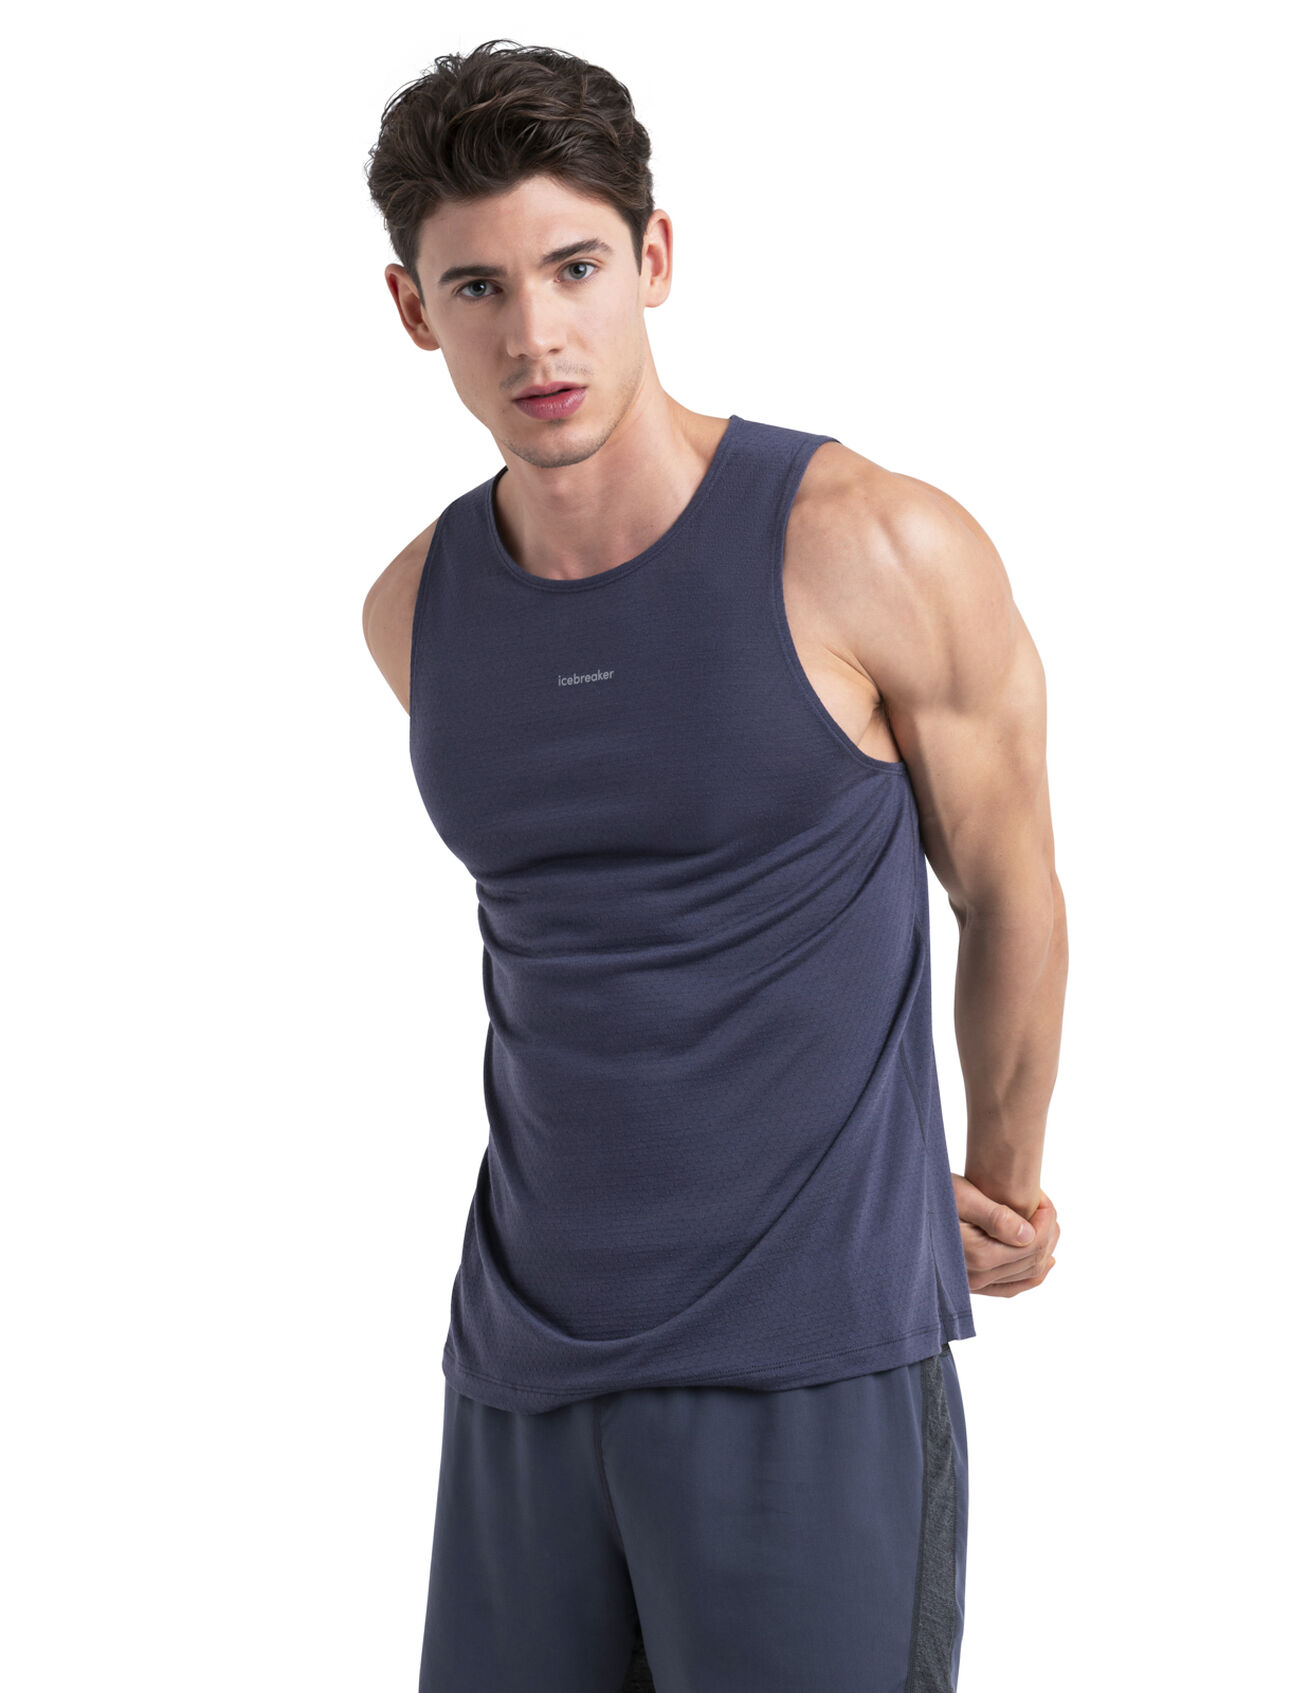 Mens 125 Cool-Lite™ Merino Blend Speed Tank Our lightest, most breathable performance tank featuring Cool-Lite™ eyelet mesh throughout, the Merino 125 Cool-Lite™ Speed Tank is ideal for running and any other high-intensity pursuits in warm conditions.